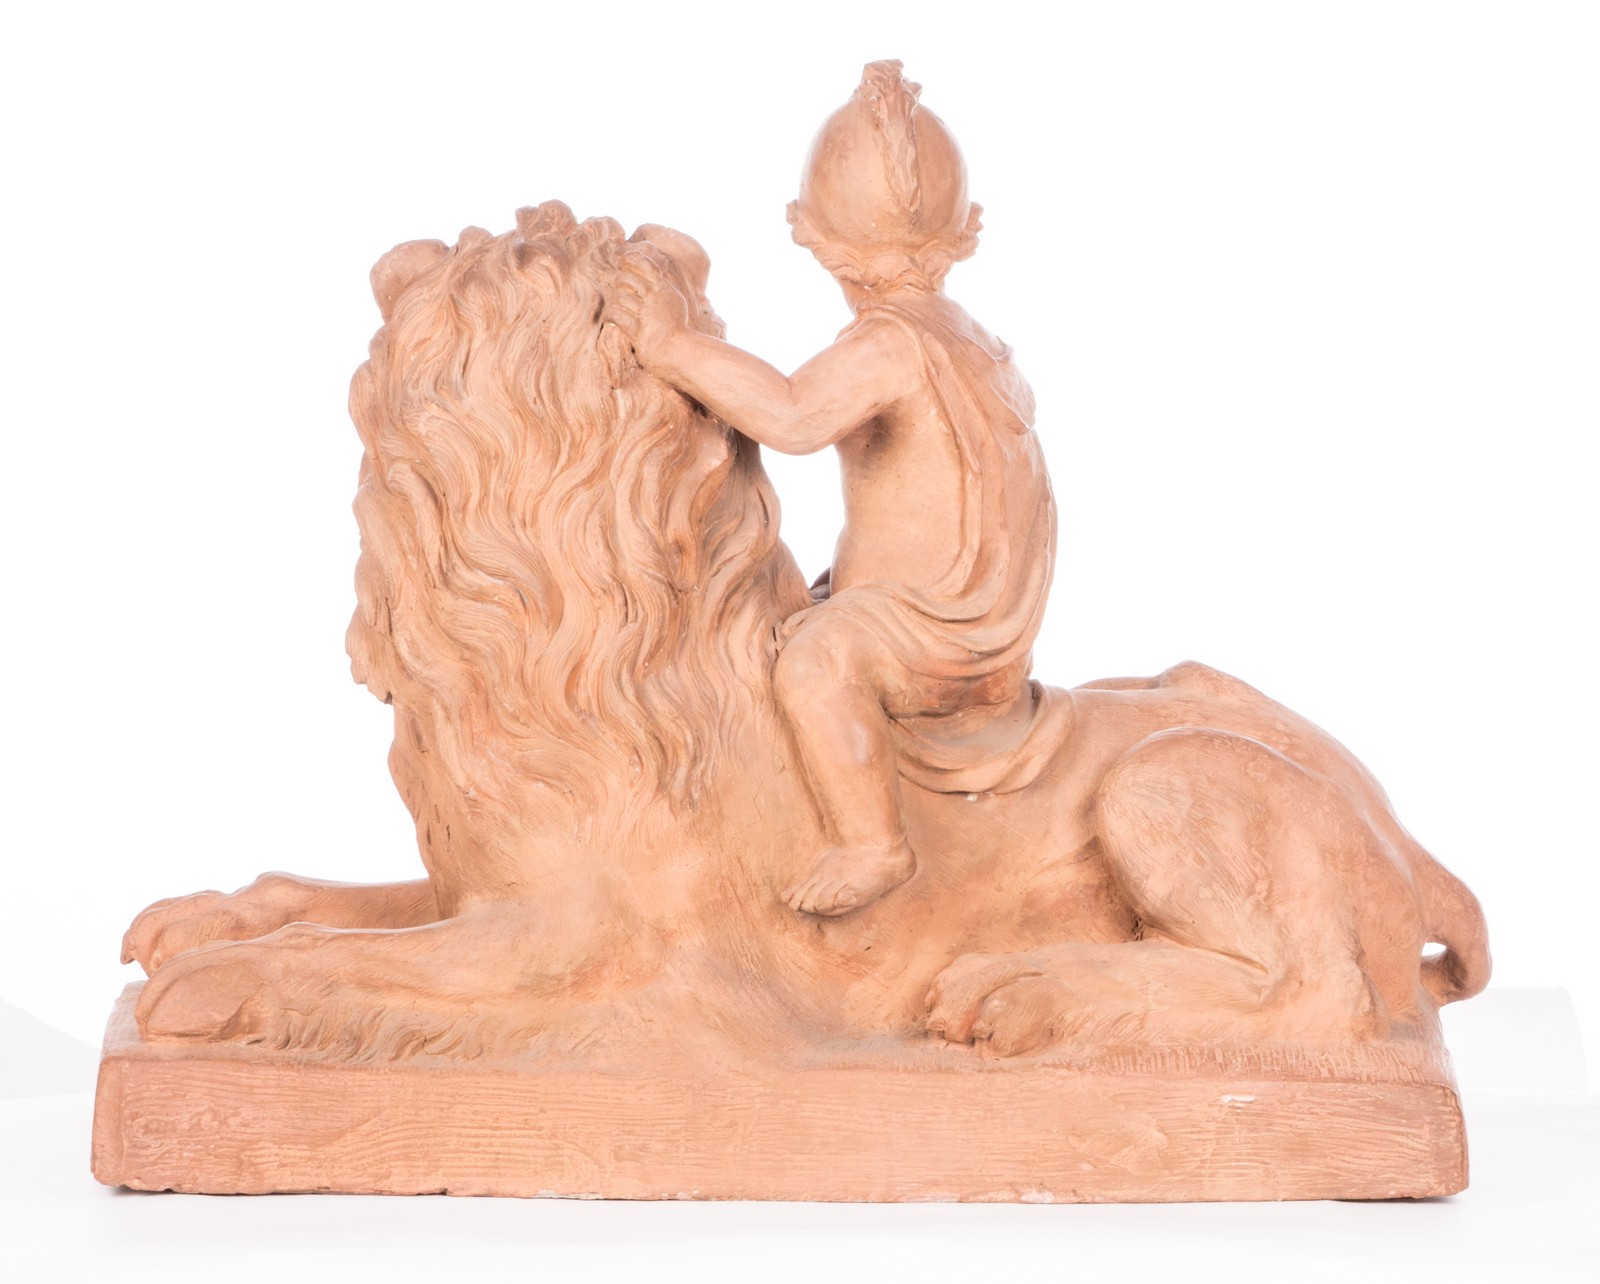 A large pair of terracotta sculptures depicting an allegoric scene, 19thC, H 78 - B 97 - D 35 cm - Image 14 of 62